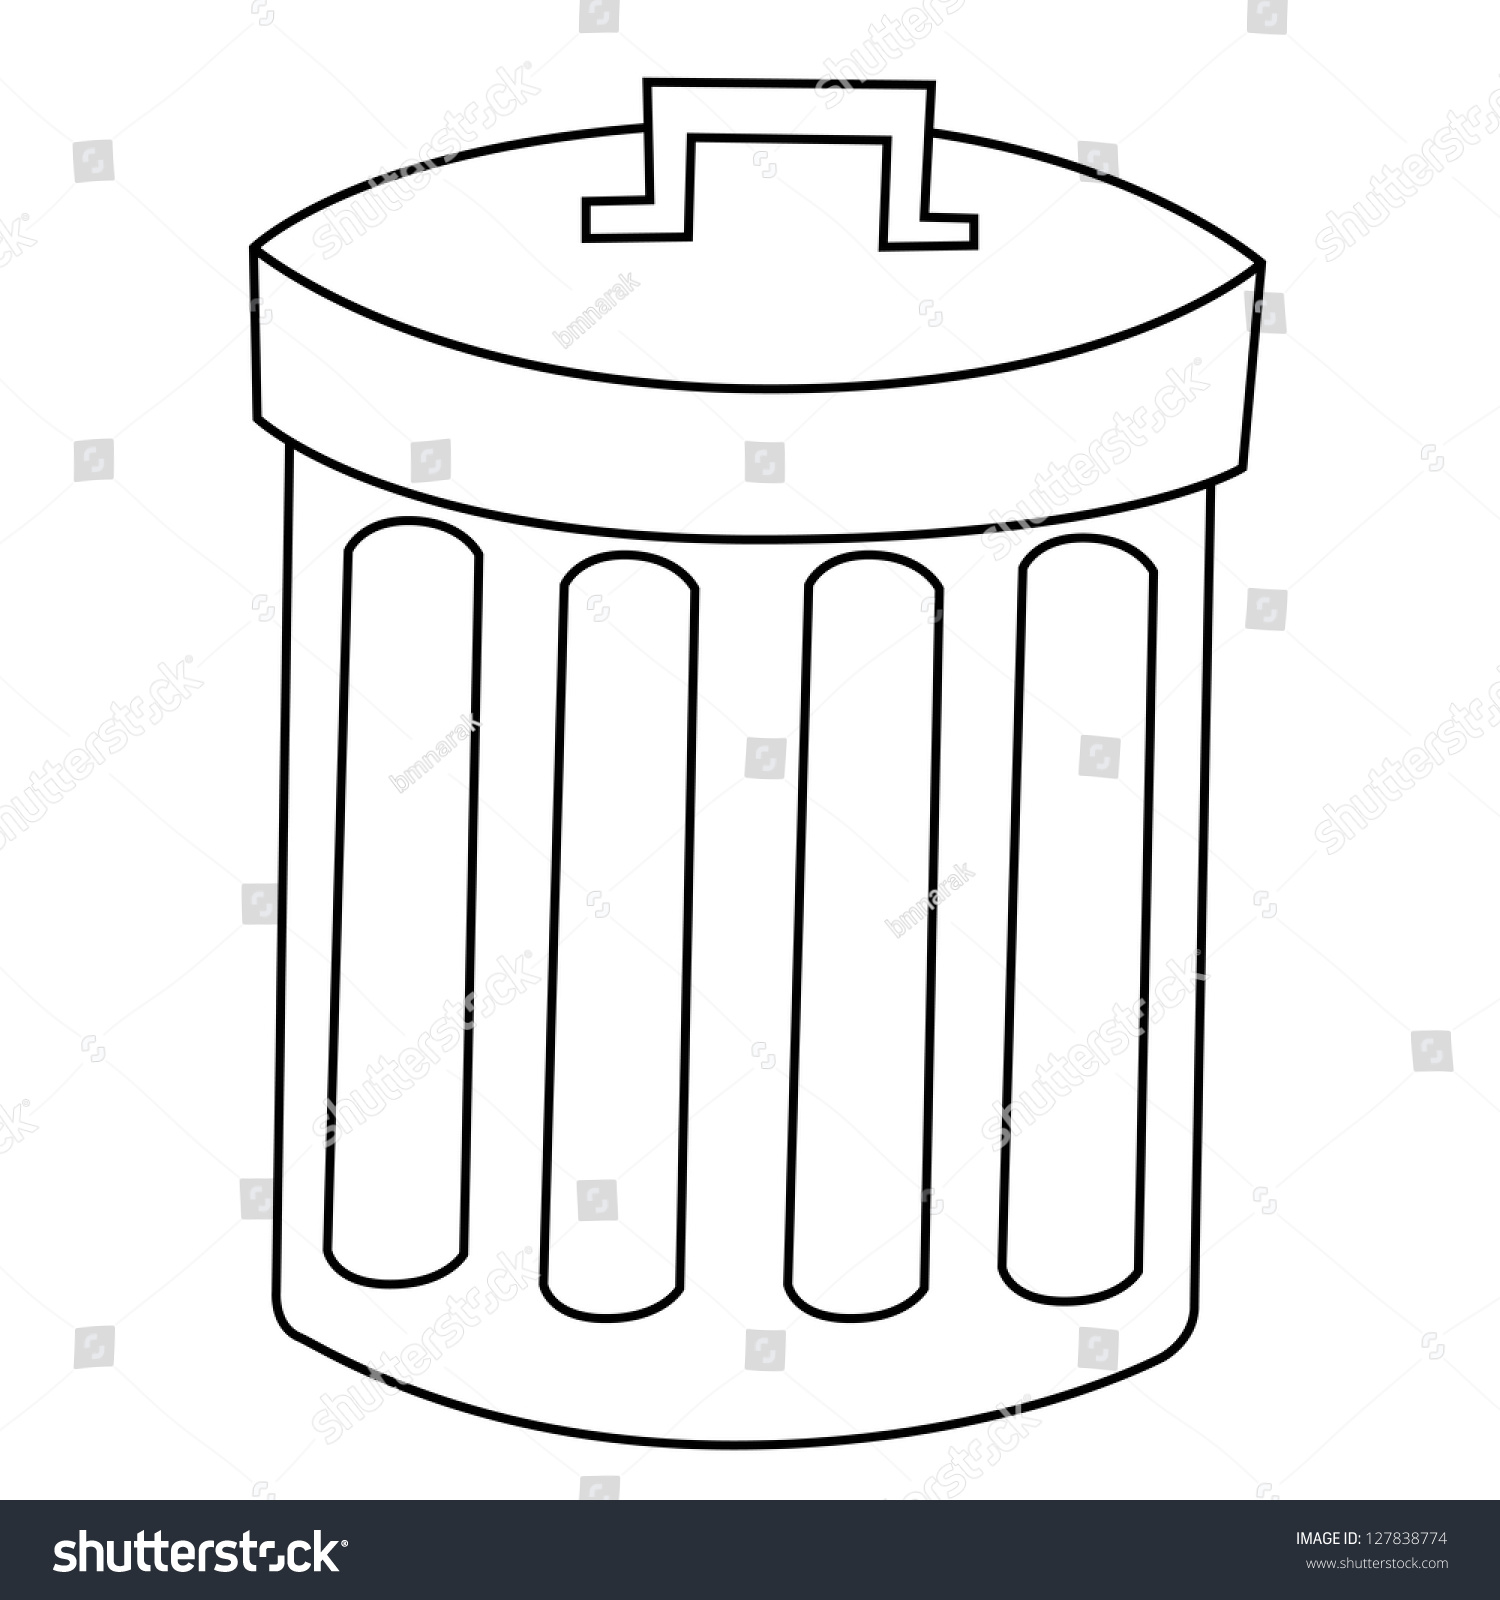 Outline Of Garbage Can Or Recycle Bin On White Background. Stock Vector ...